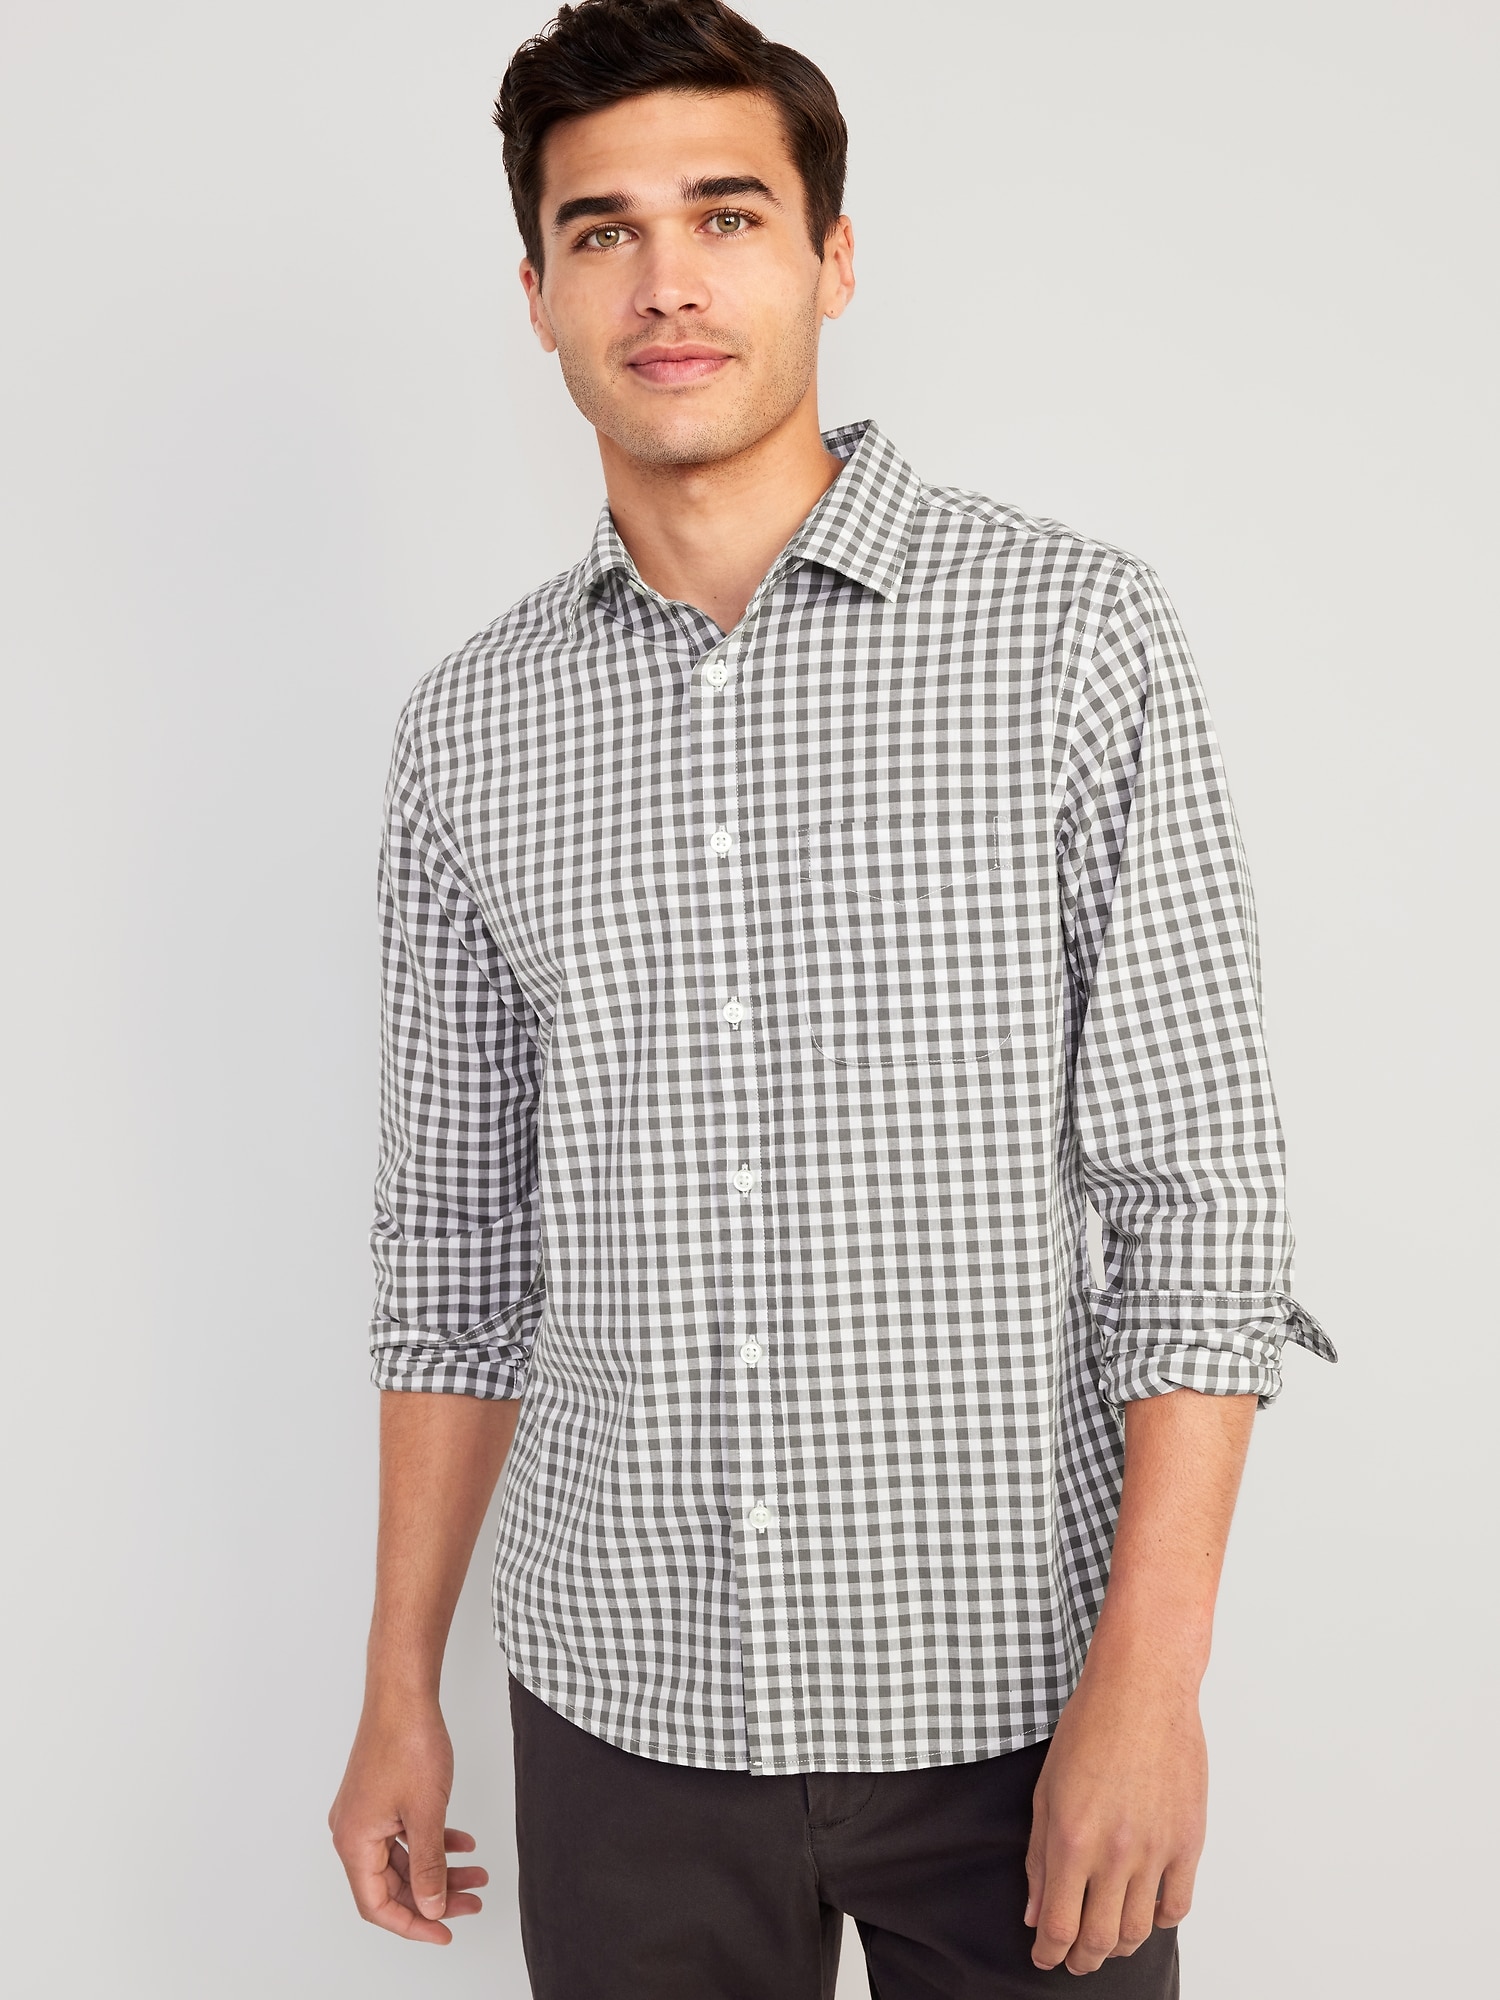 Classic-Fit Everyday Shirt